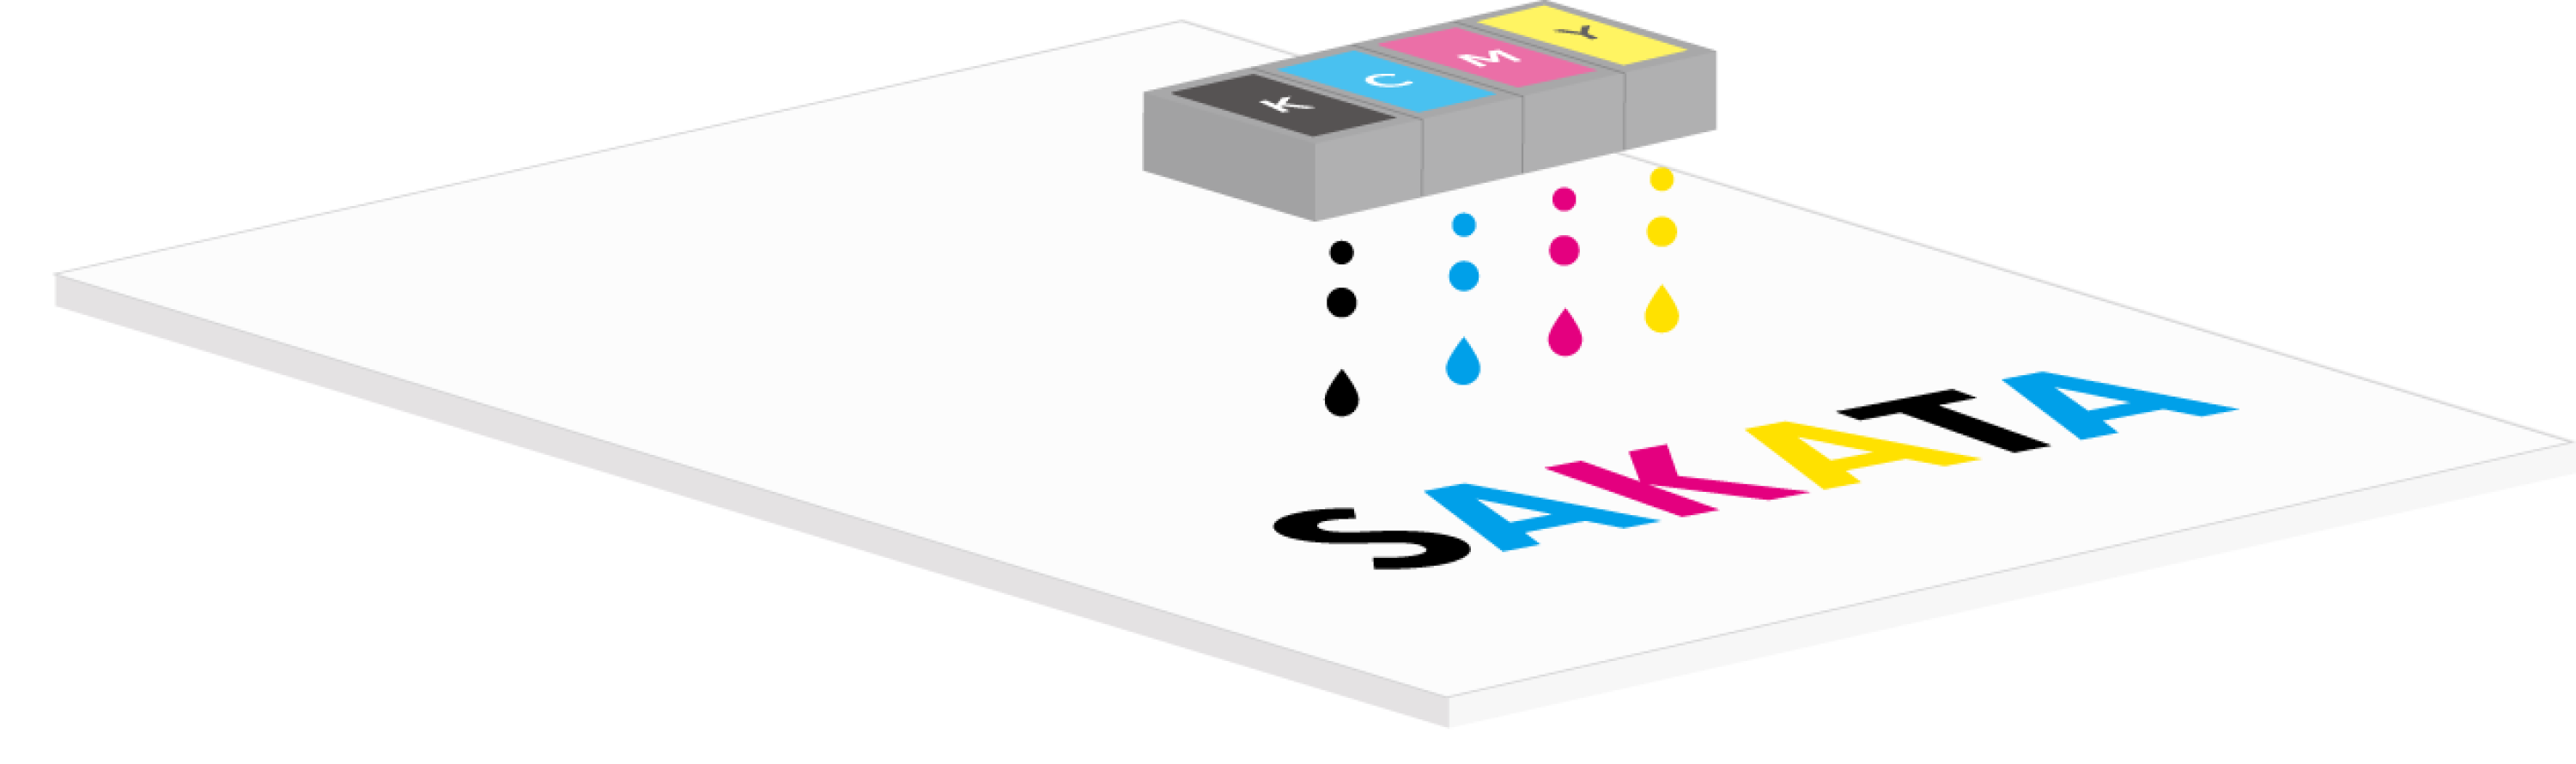 About Inkjet Printing